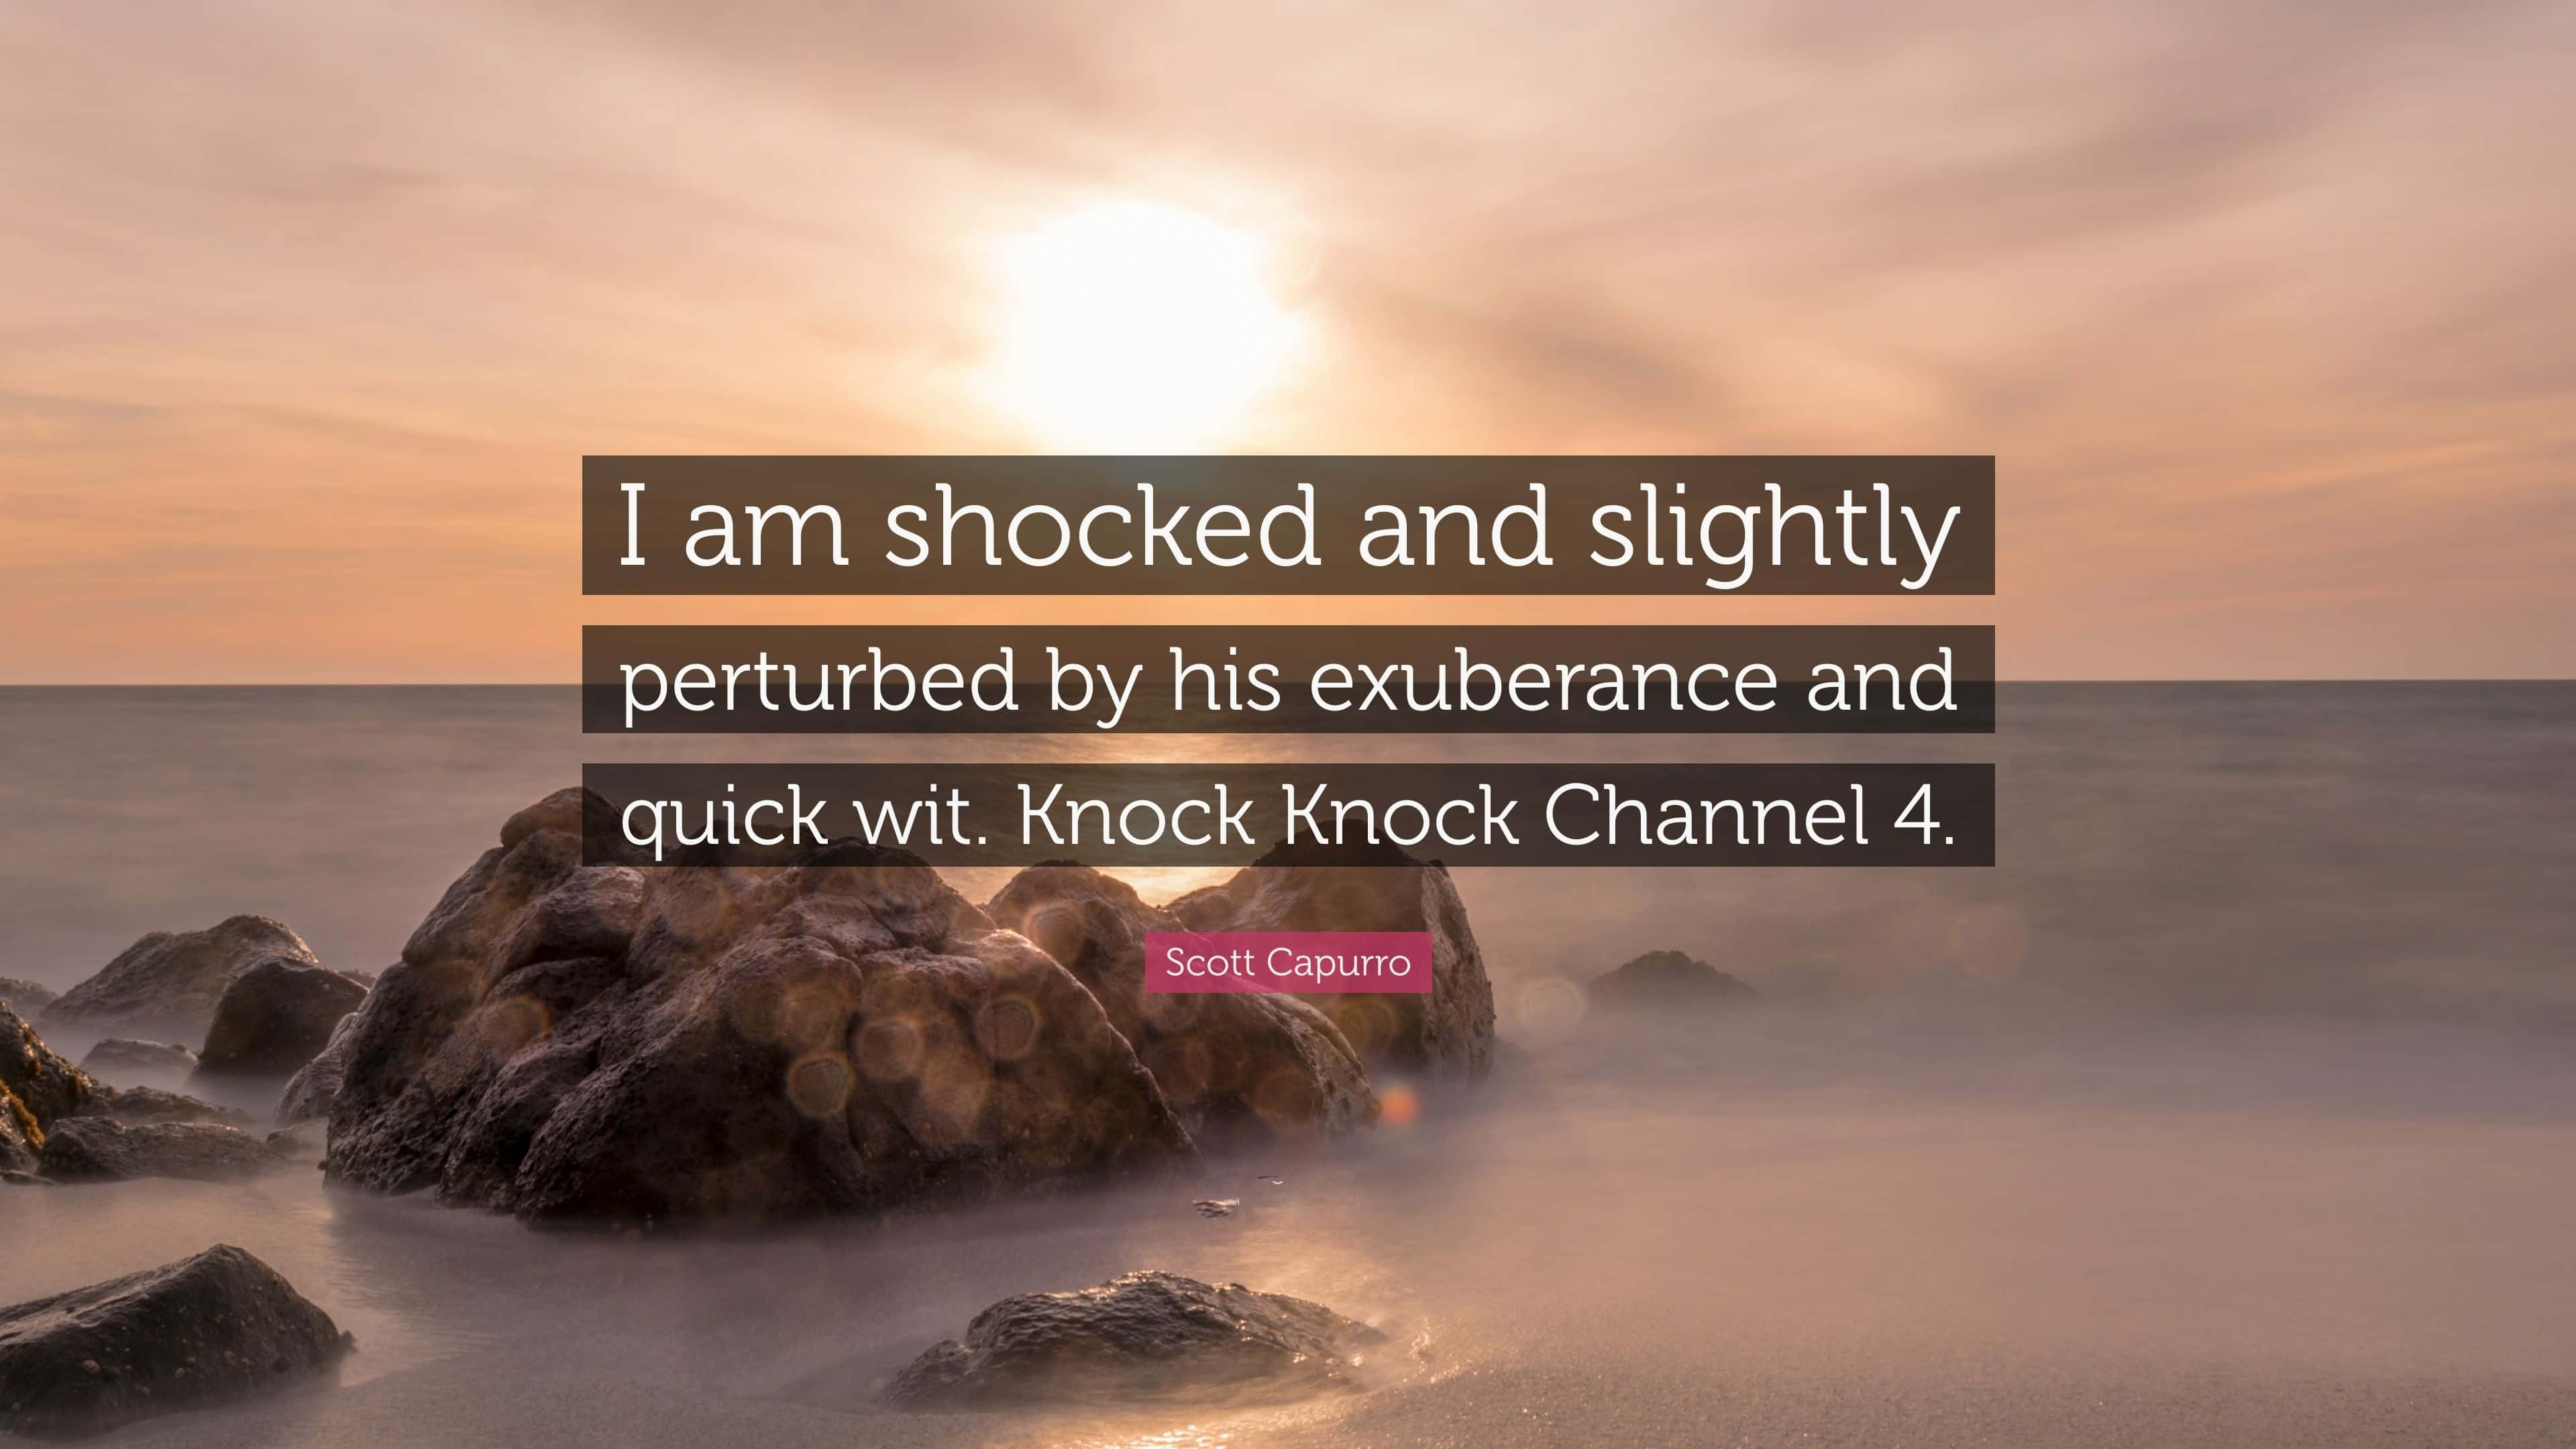 I Am Shocked And Perturbed Quote Wallpaper